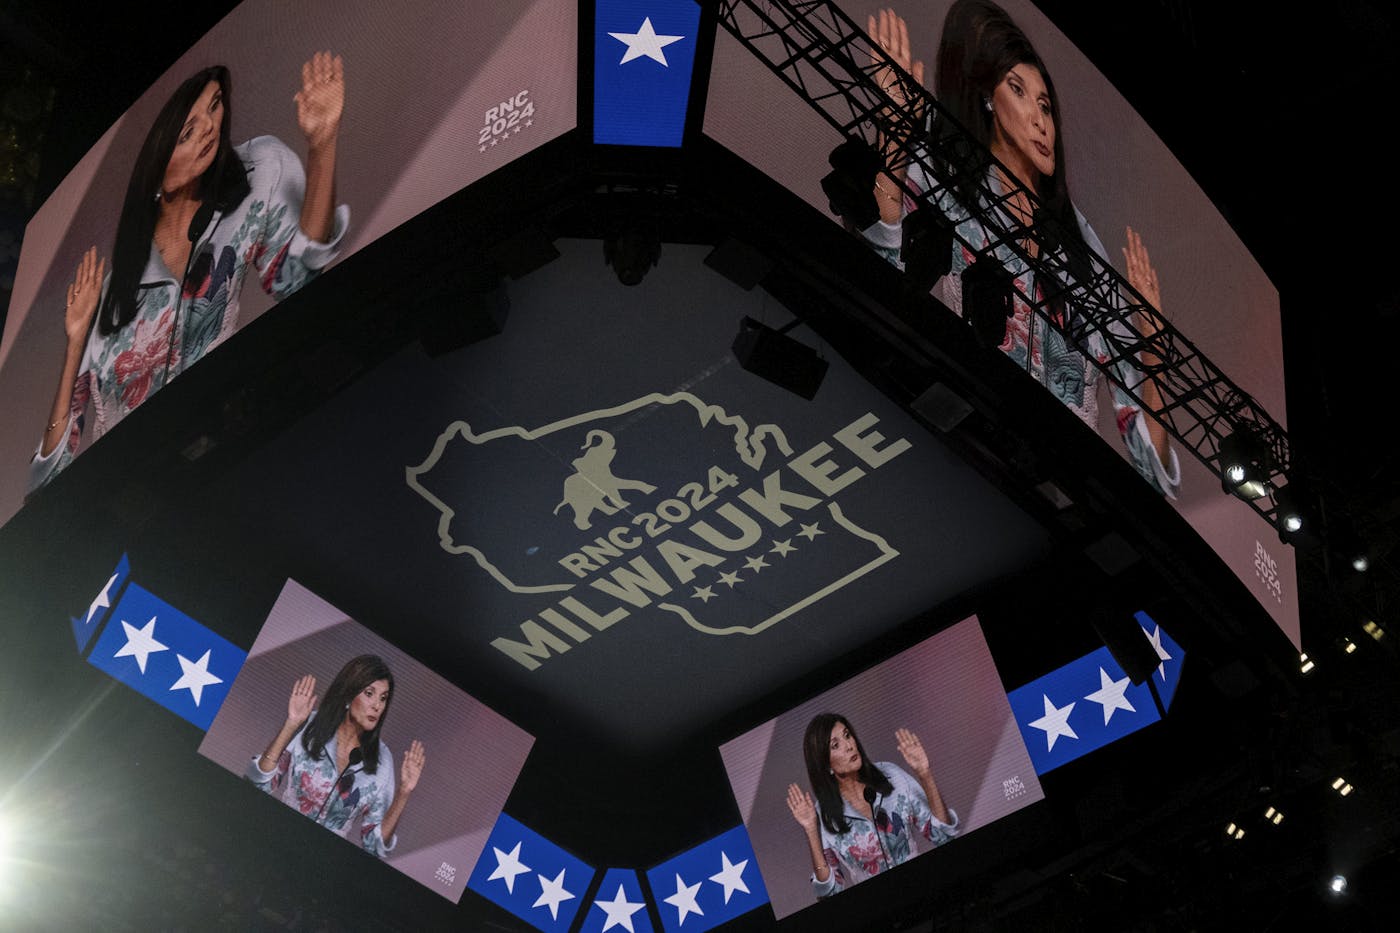 A photograph of Nikki Haley on four giant screens on the ceiling of the Republication National Convention 